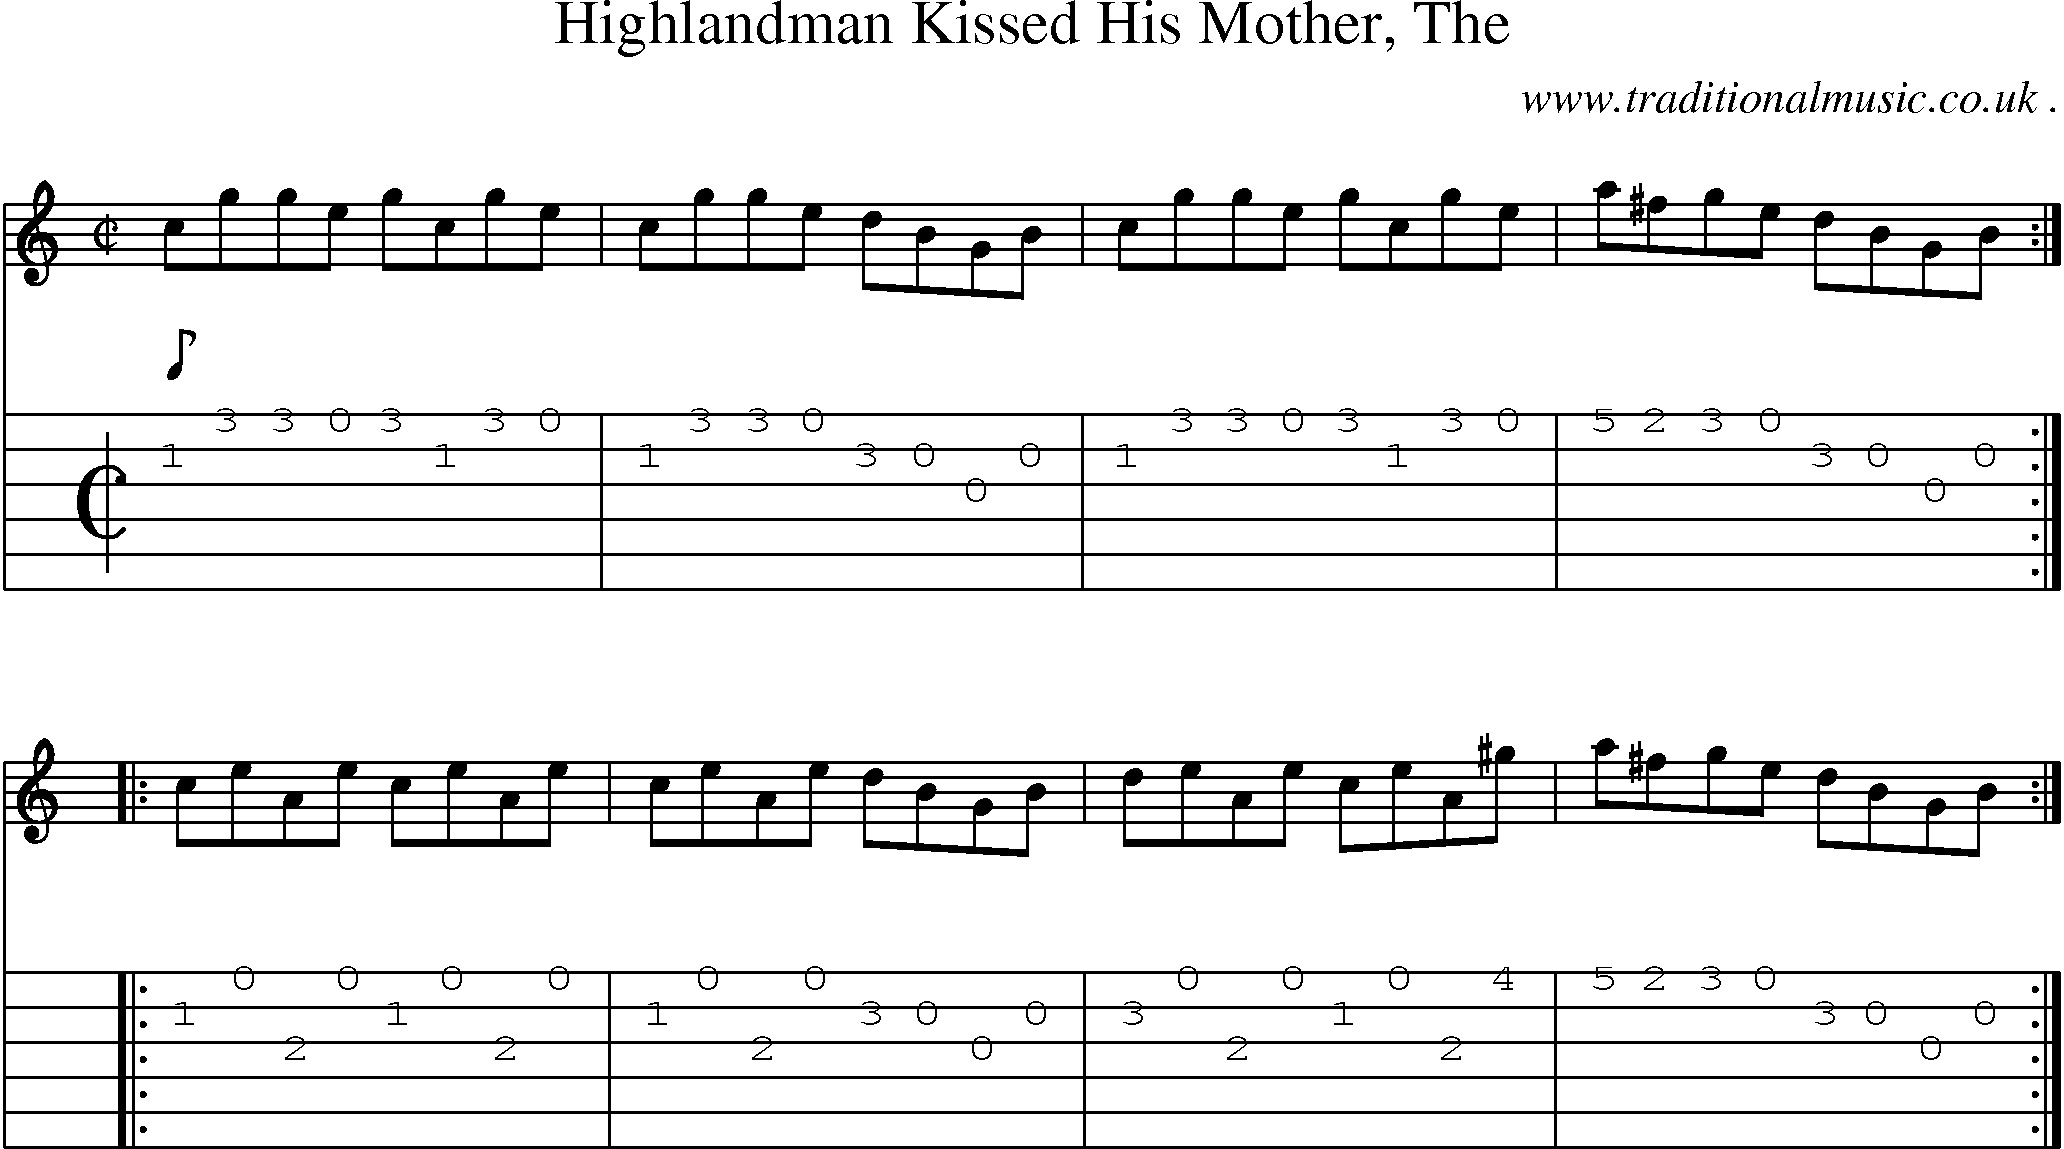 Sheet-music  score, Chords and Guitar Tabs for Highlandman Kissed His Mother The